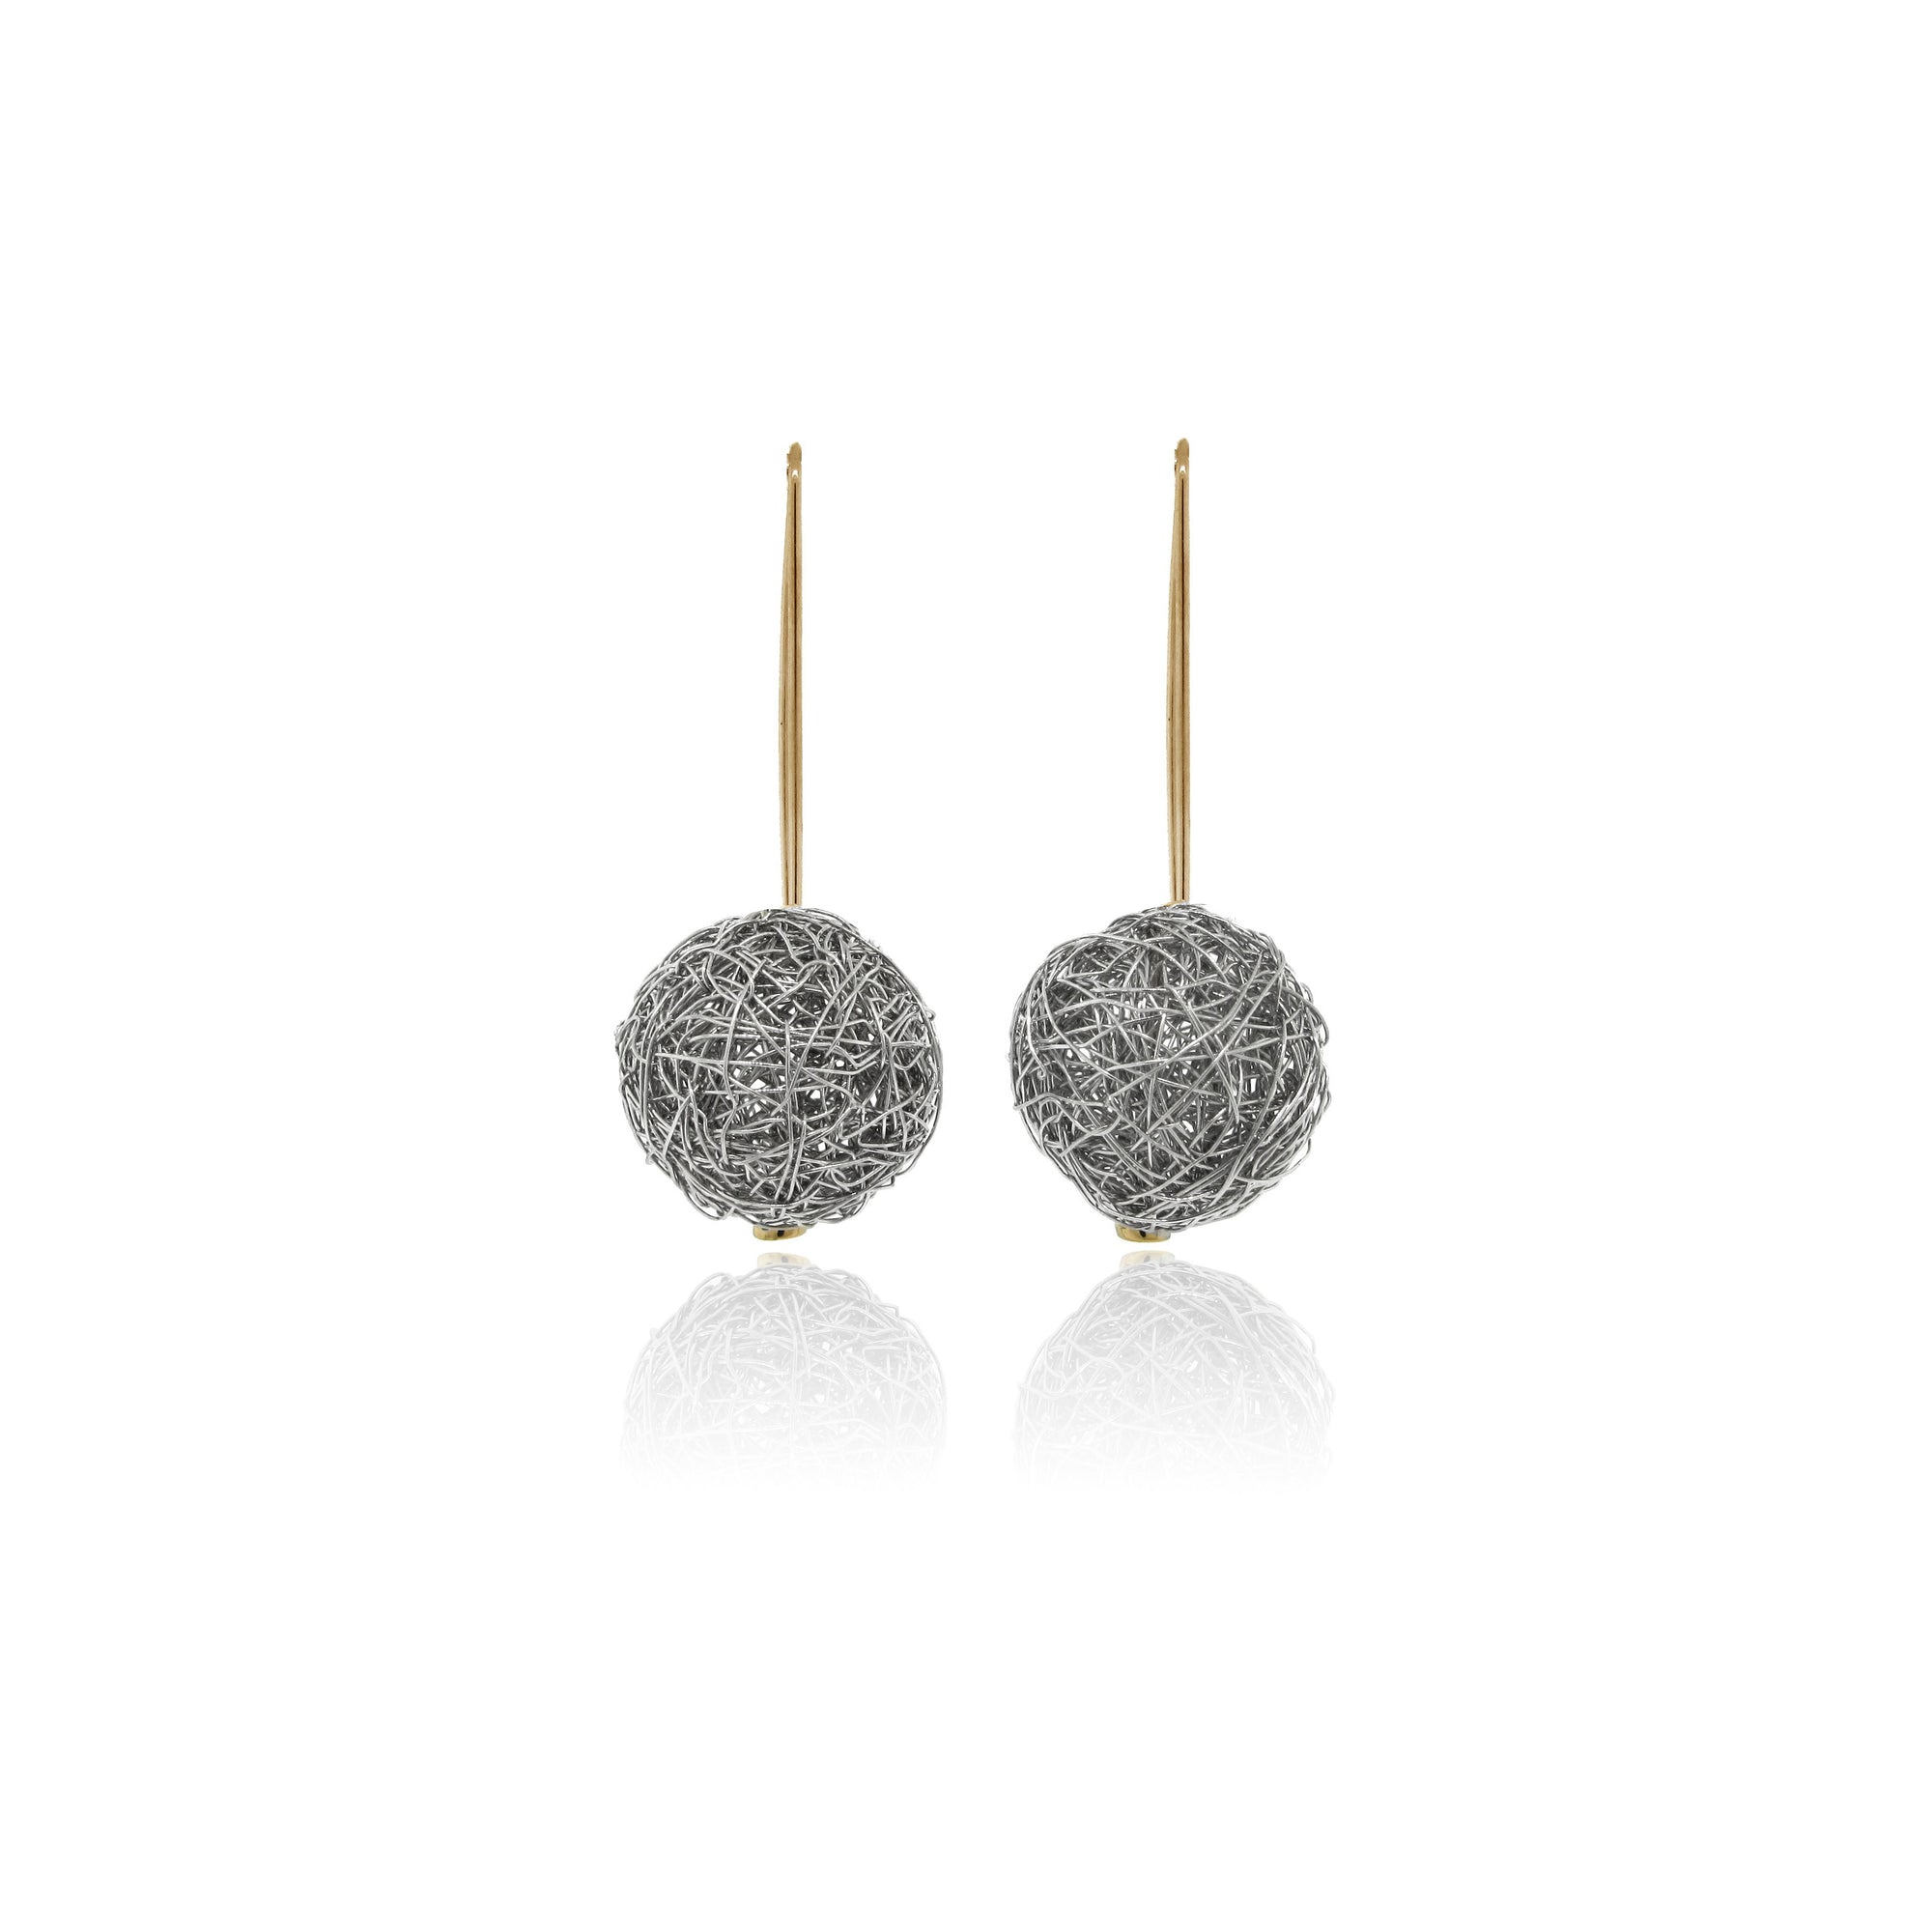 14K Yellow and White Gold Round Shape Mesh Earrings